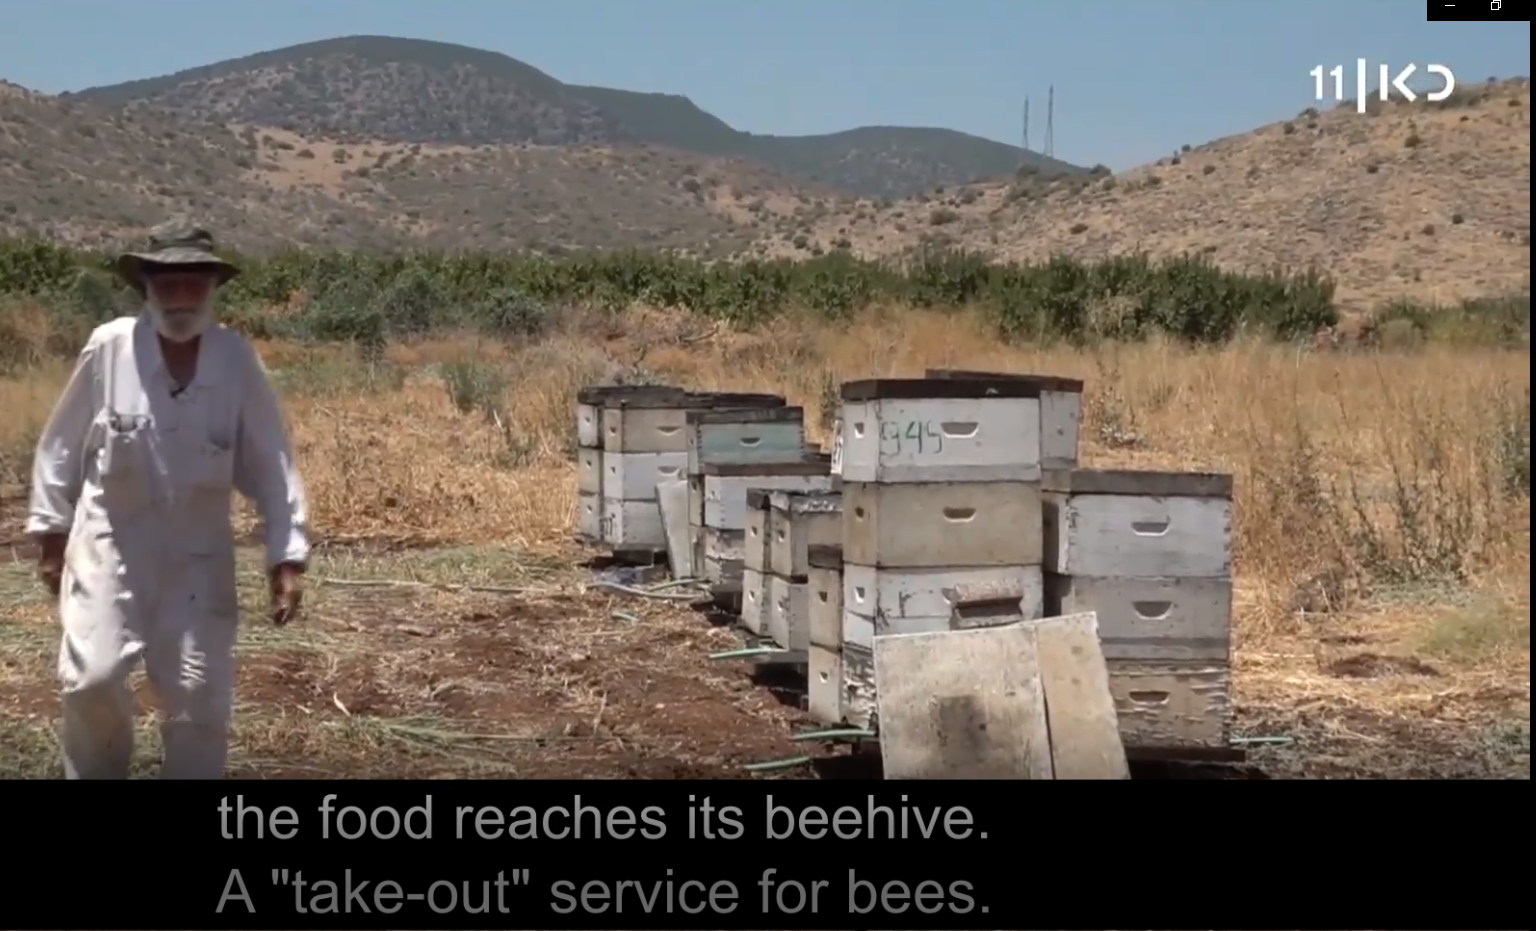 Zuf Globus extracts are “take out” food for bees